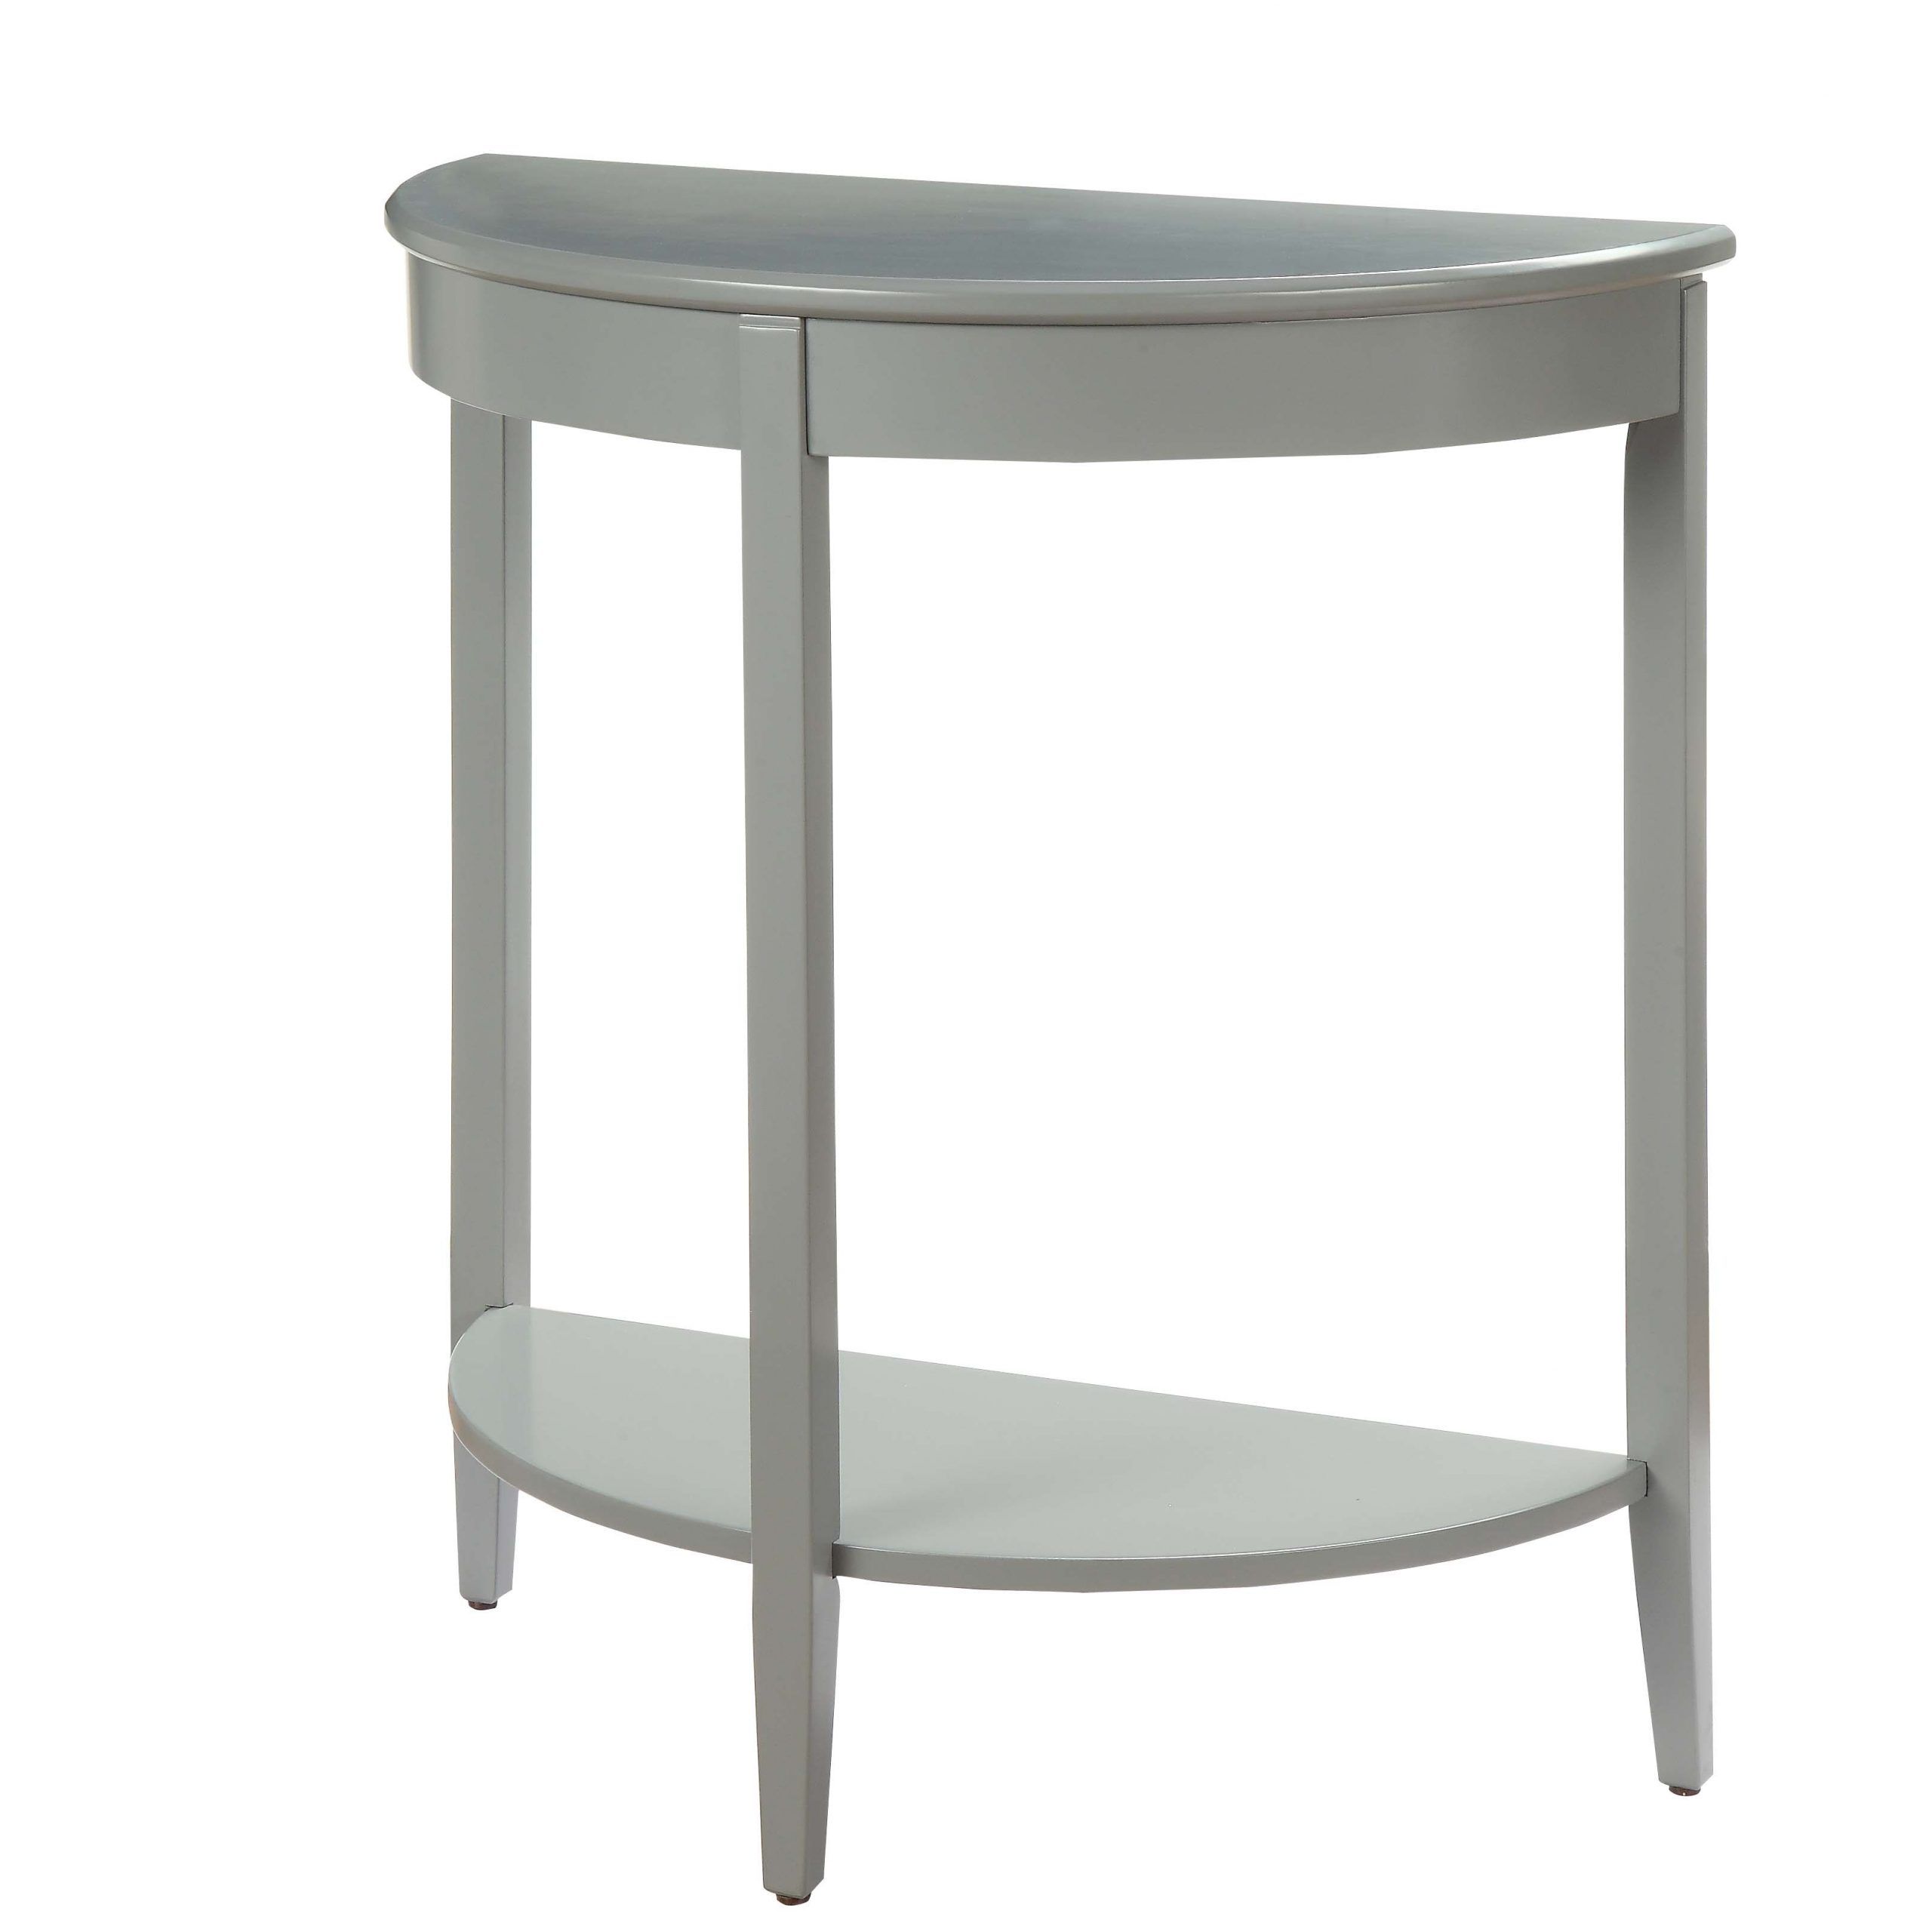 Acme Justino Half Moon Console Table In Gray With 1 Shelf – Walmart With Regard To 1 Shelf Console Tables (View 3 of 20)